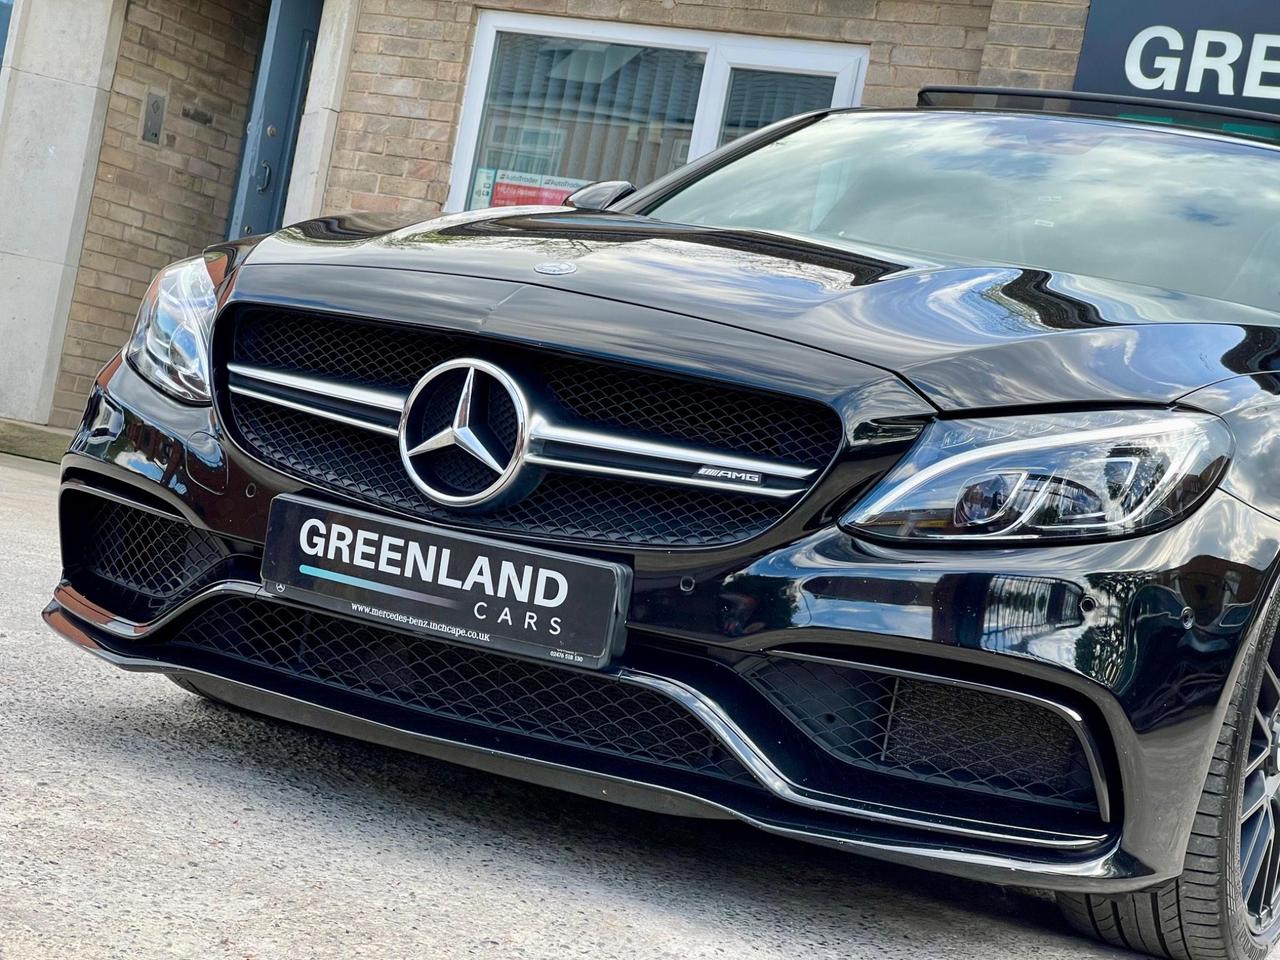 Used 2016 Mercedes-Benz C Class for sale in Sheffield